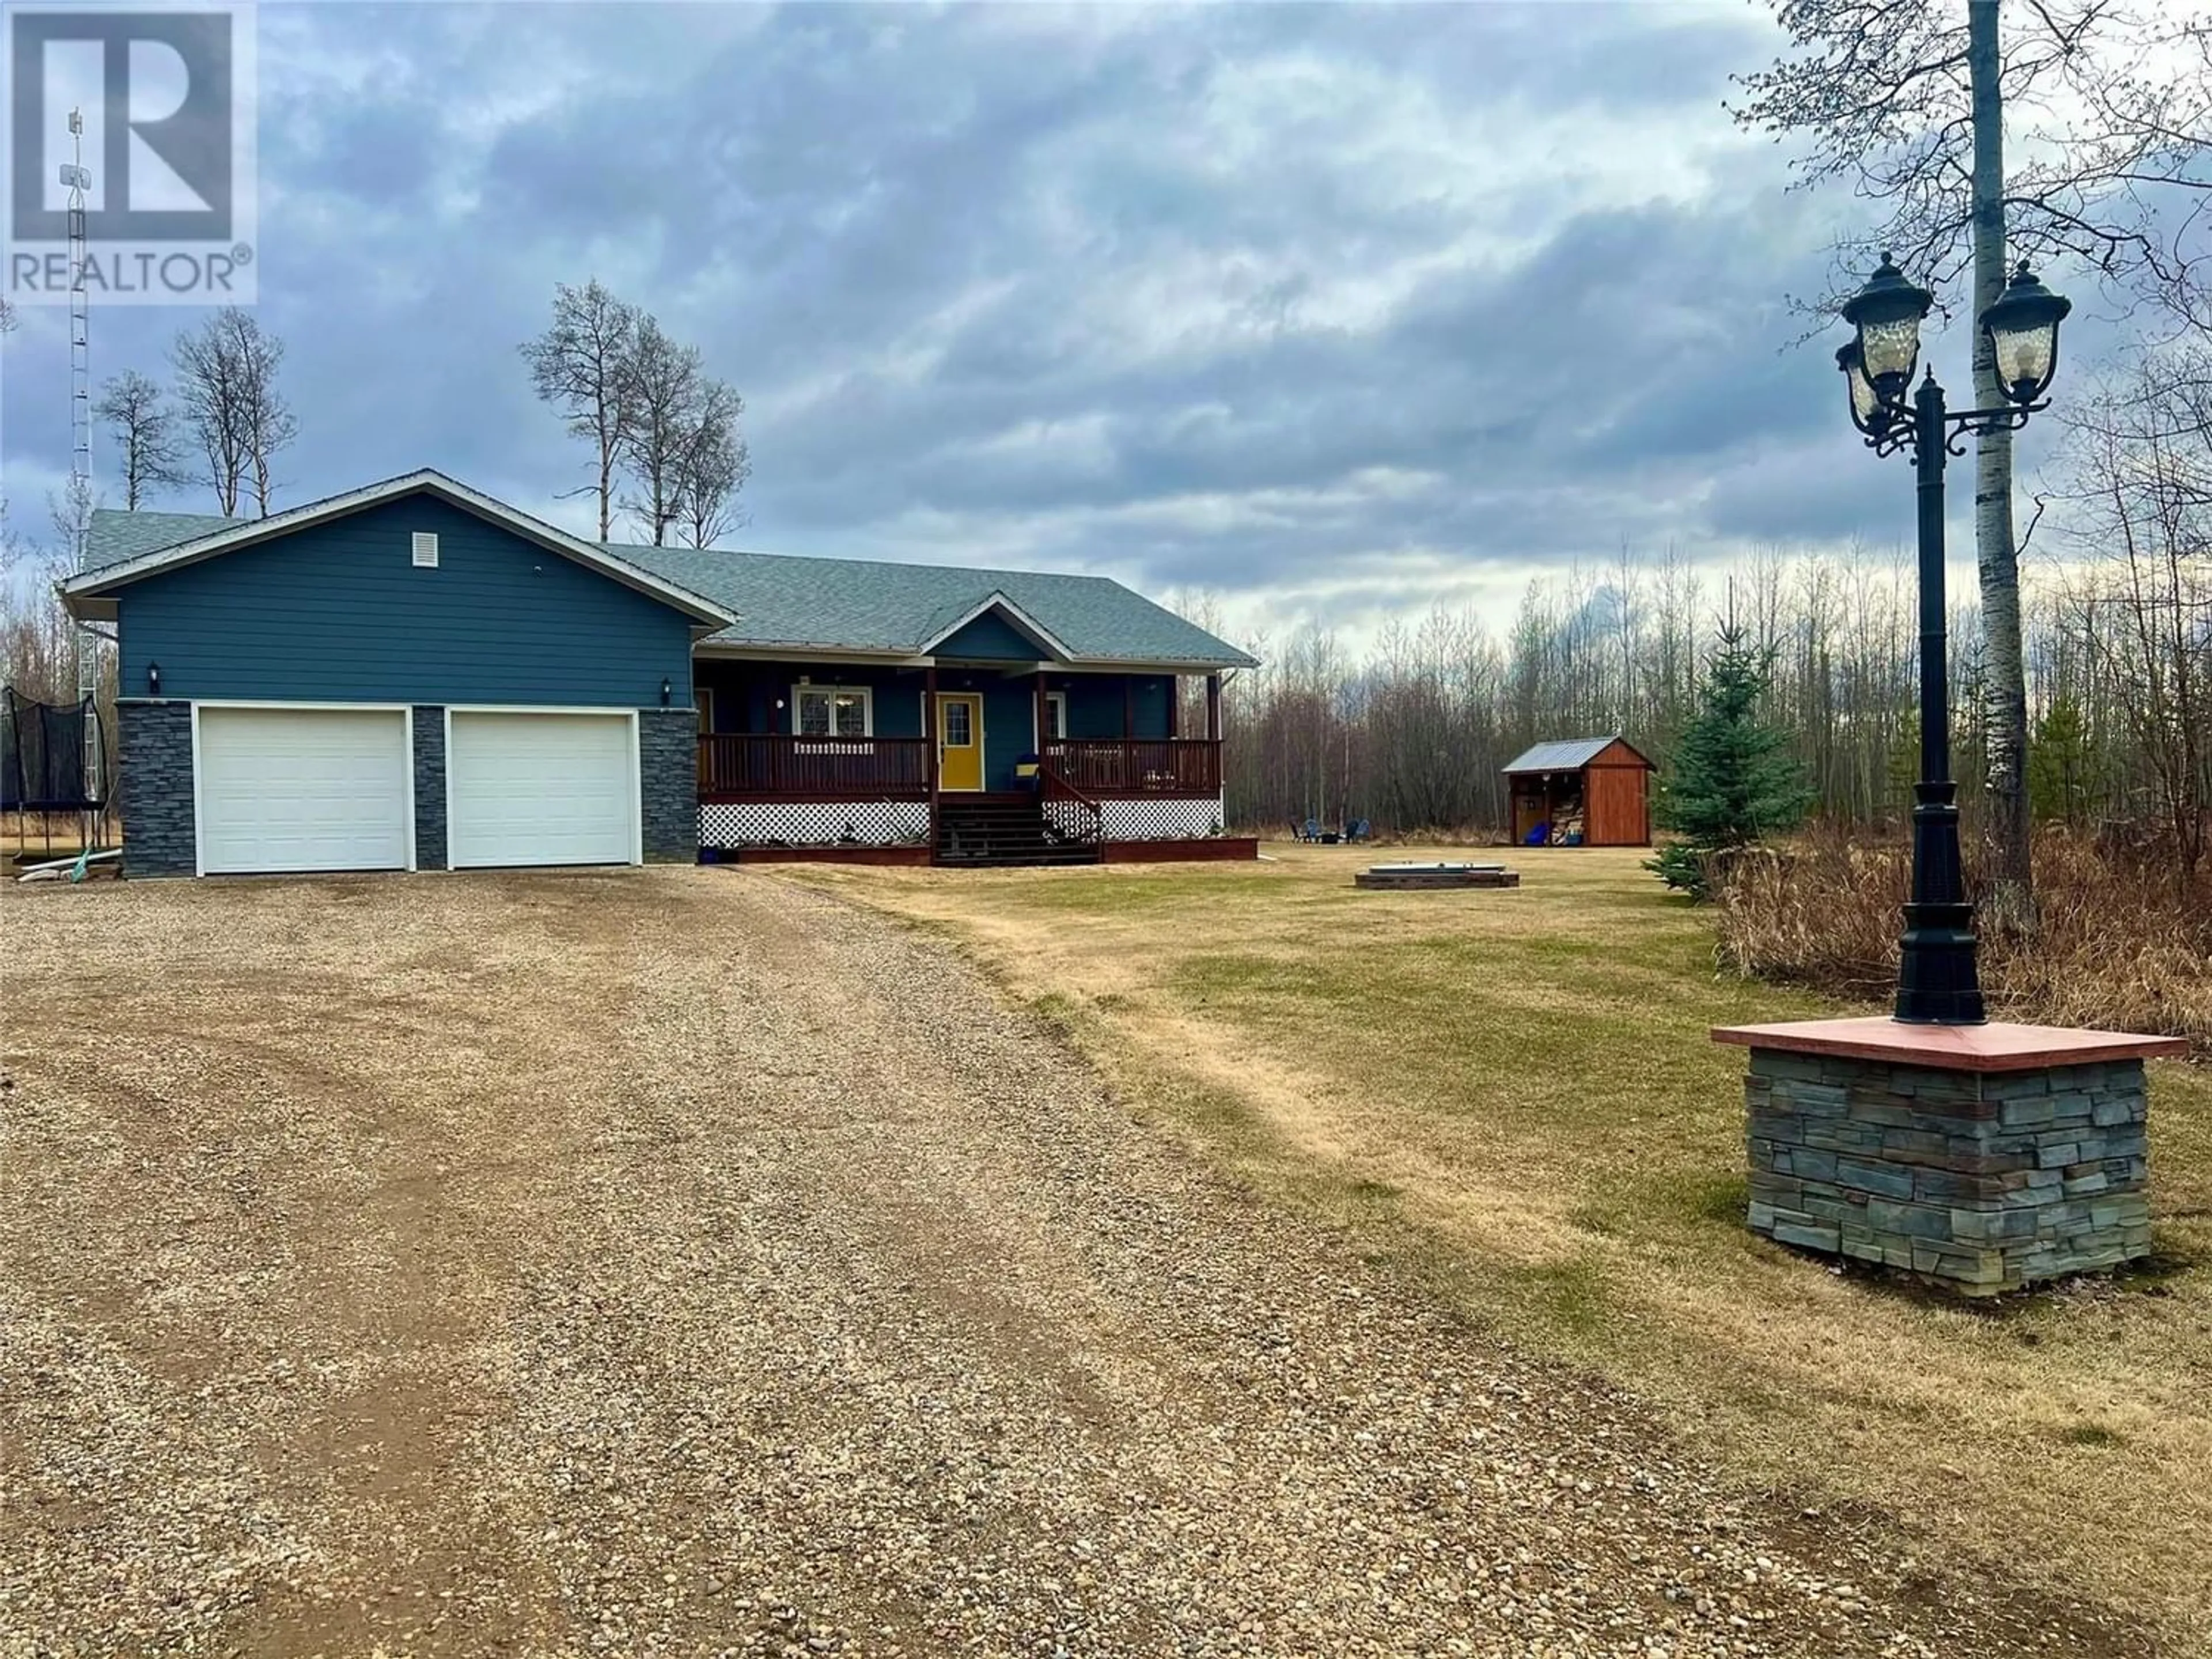 Frontside or backside of a home for 10119 235 Road, Dawson Creek British Columbia V1G4E7